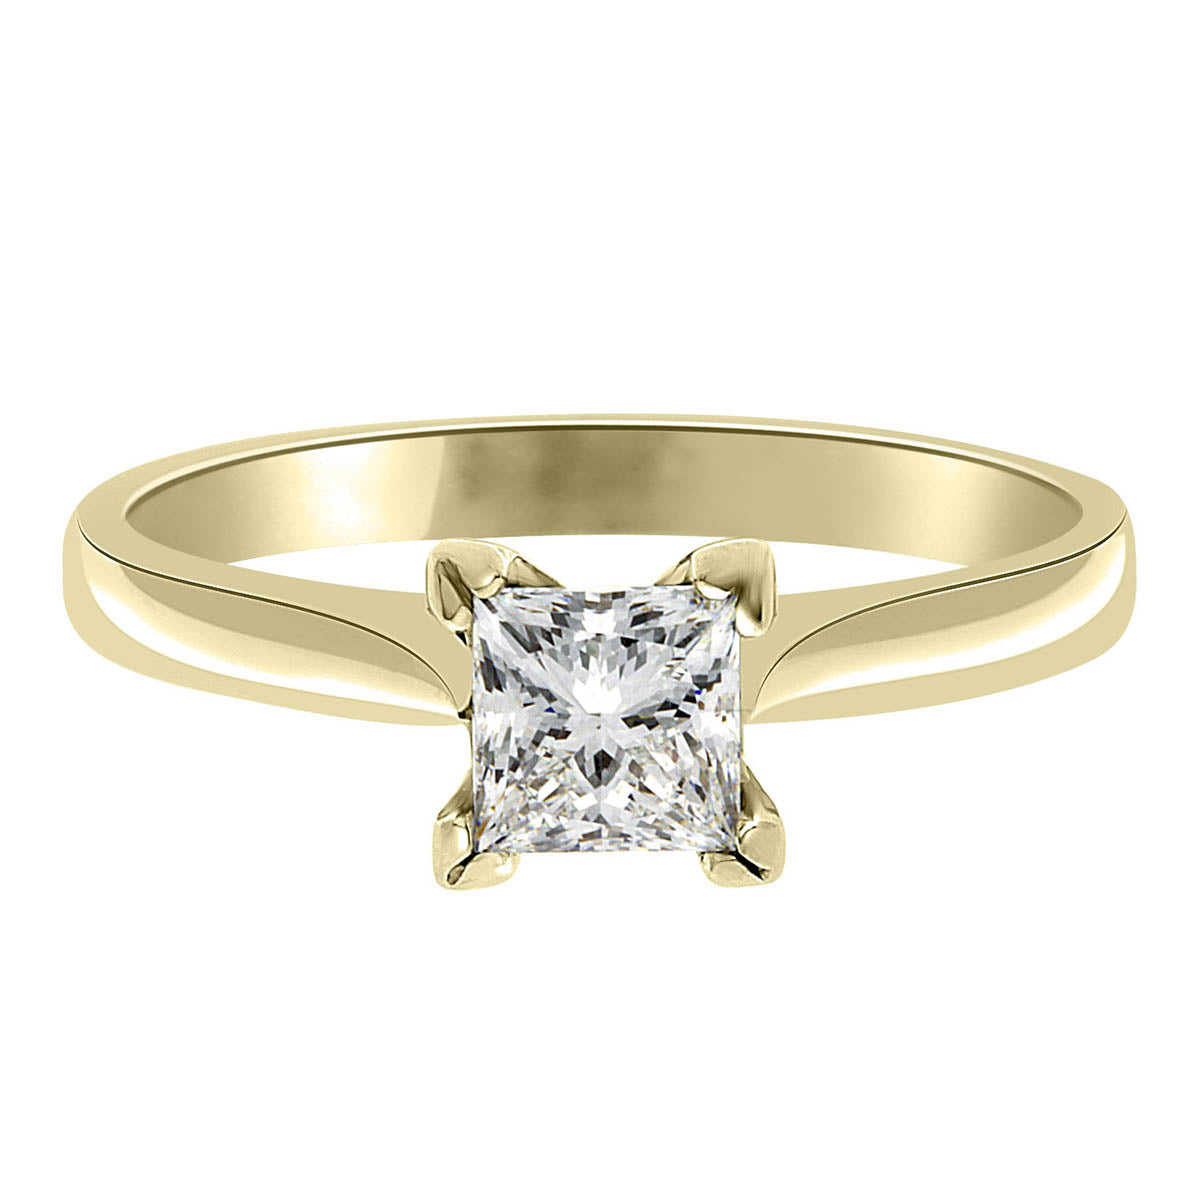 Princess Cut Solitaire  engagement ring in yellow gold